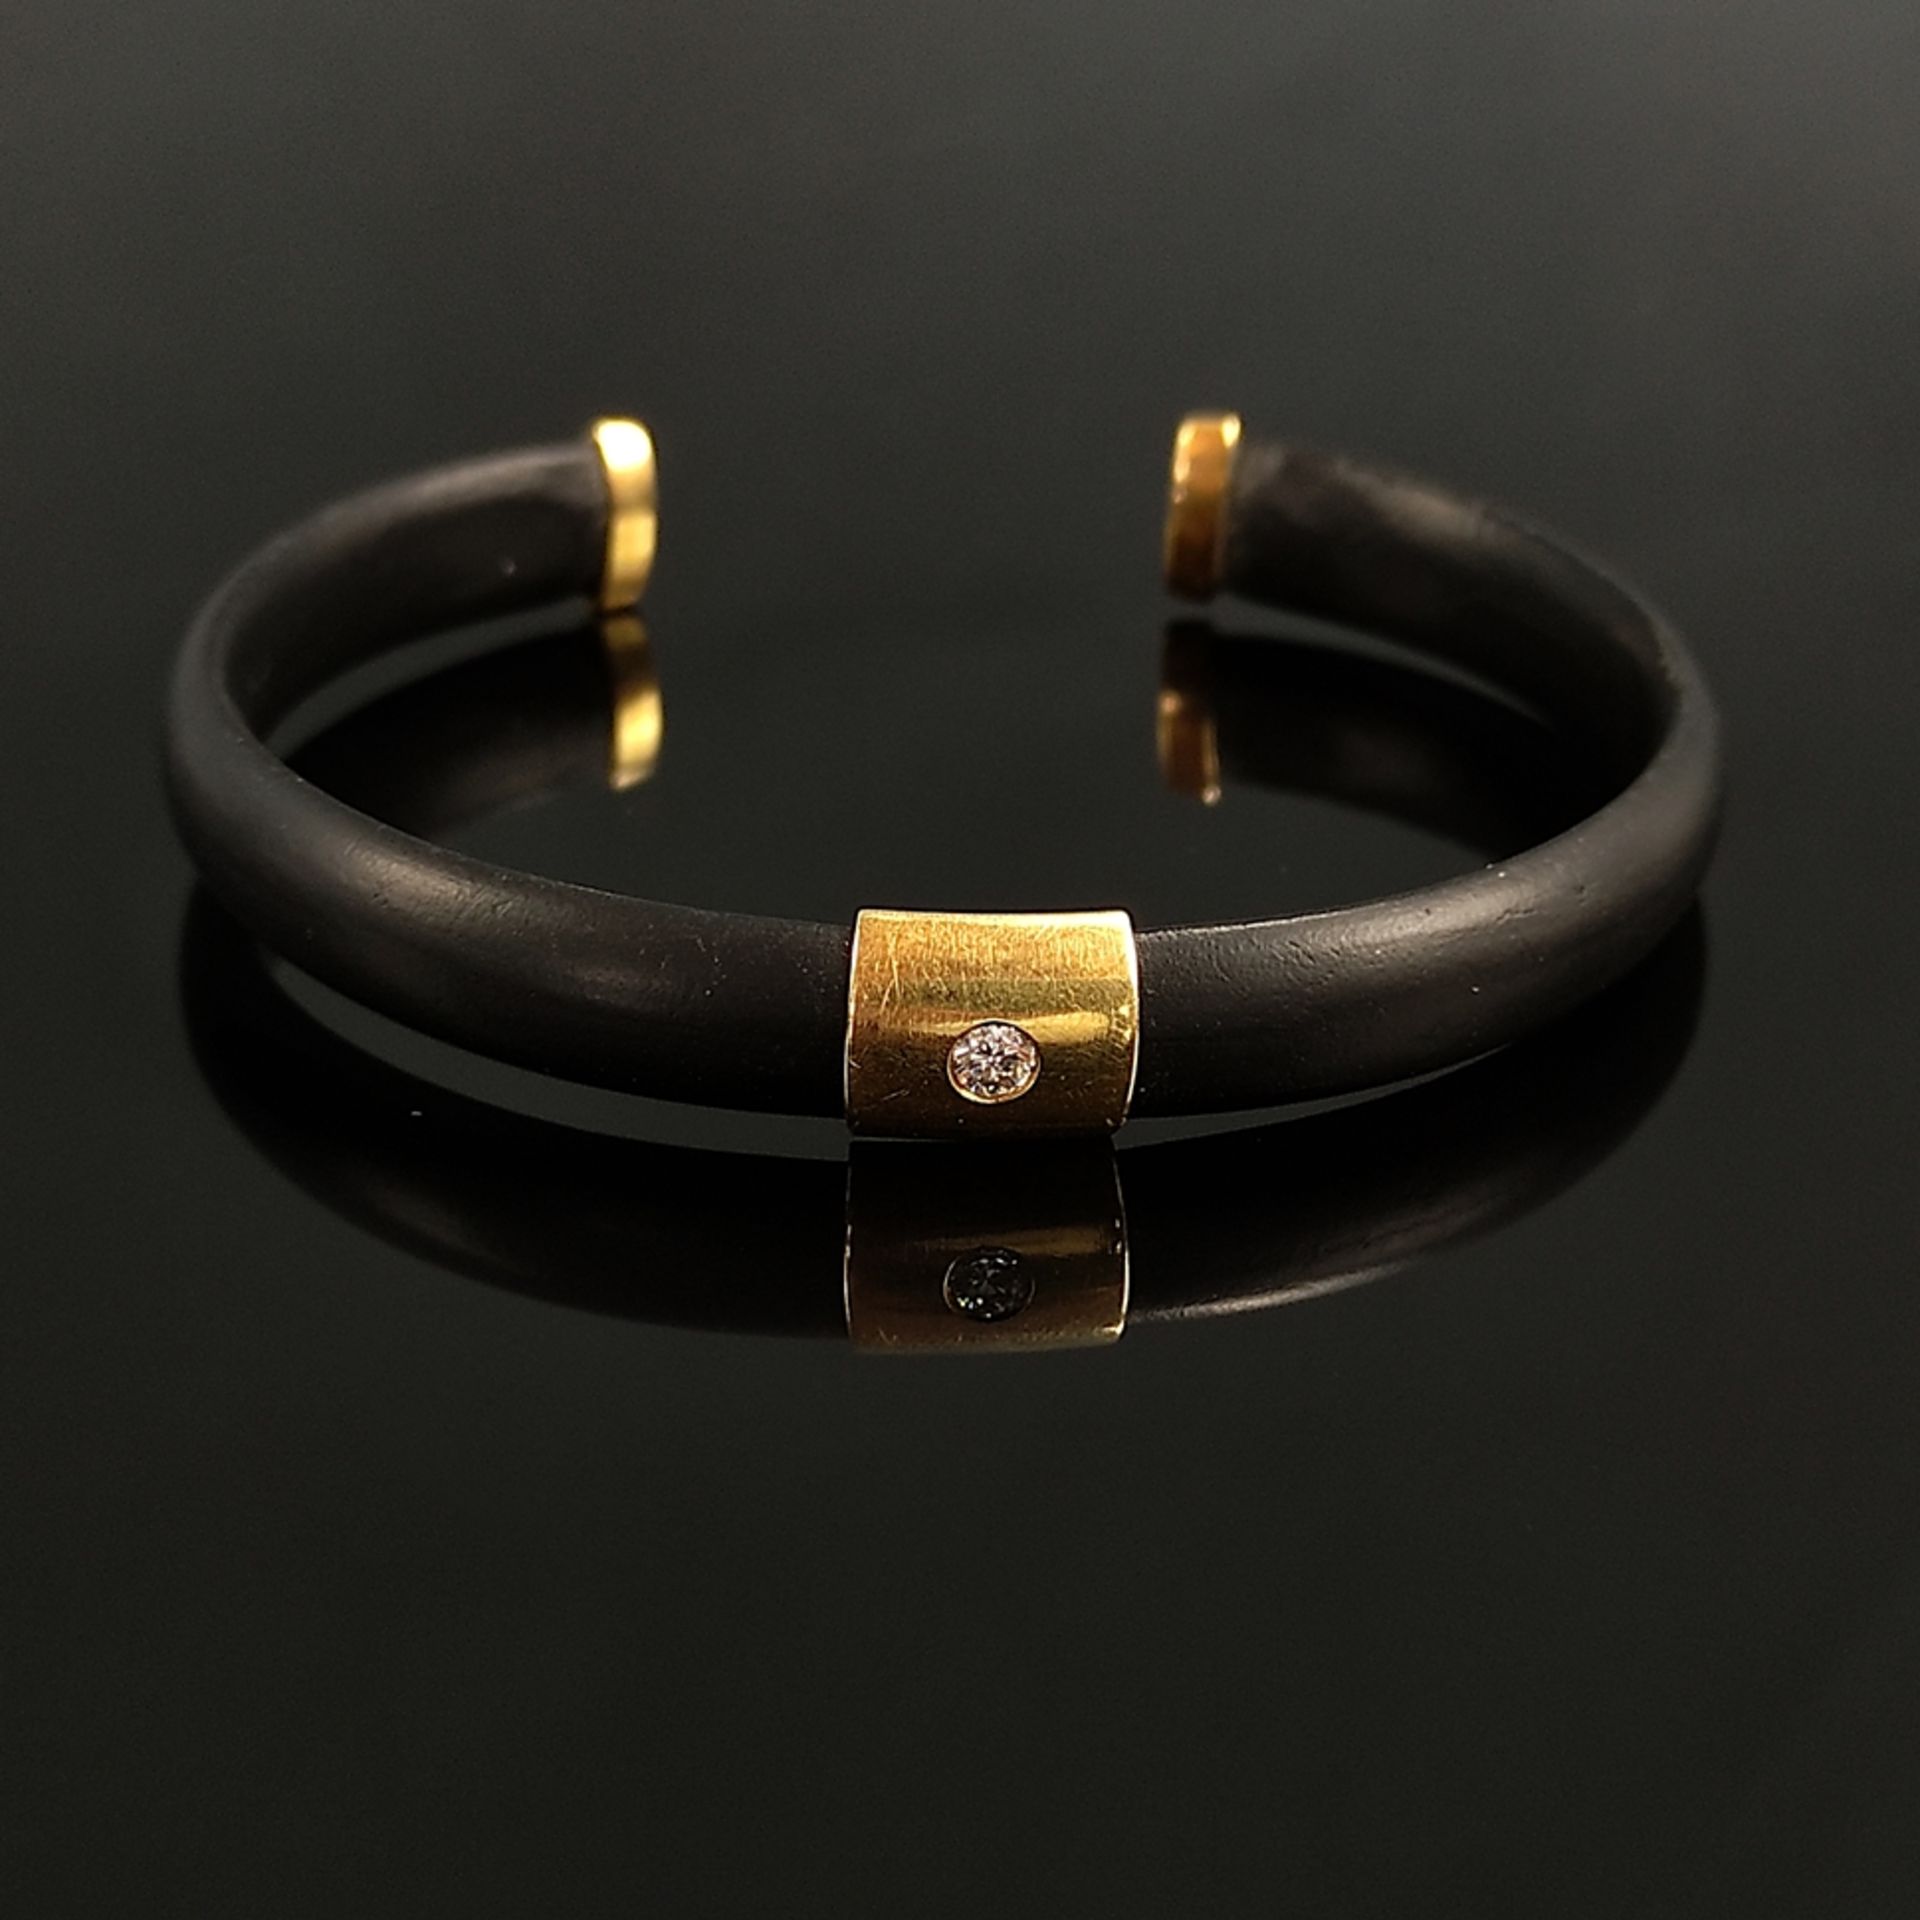 Modern Bunz design bangle, hoop made of caoutchouc, in the center and at the edges elements made of